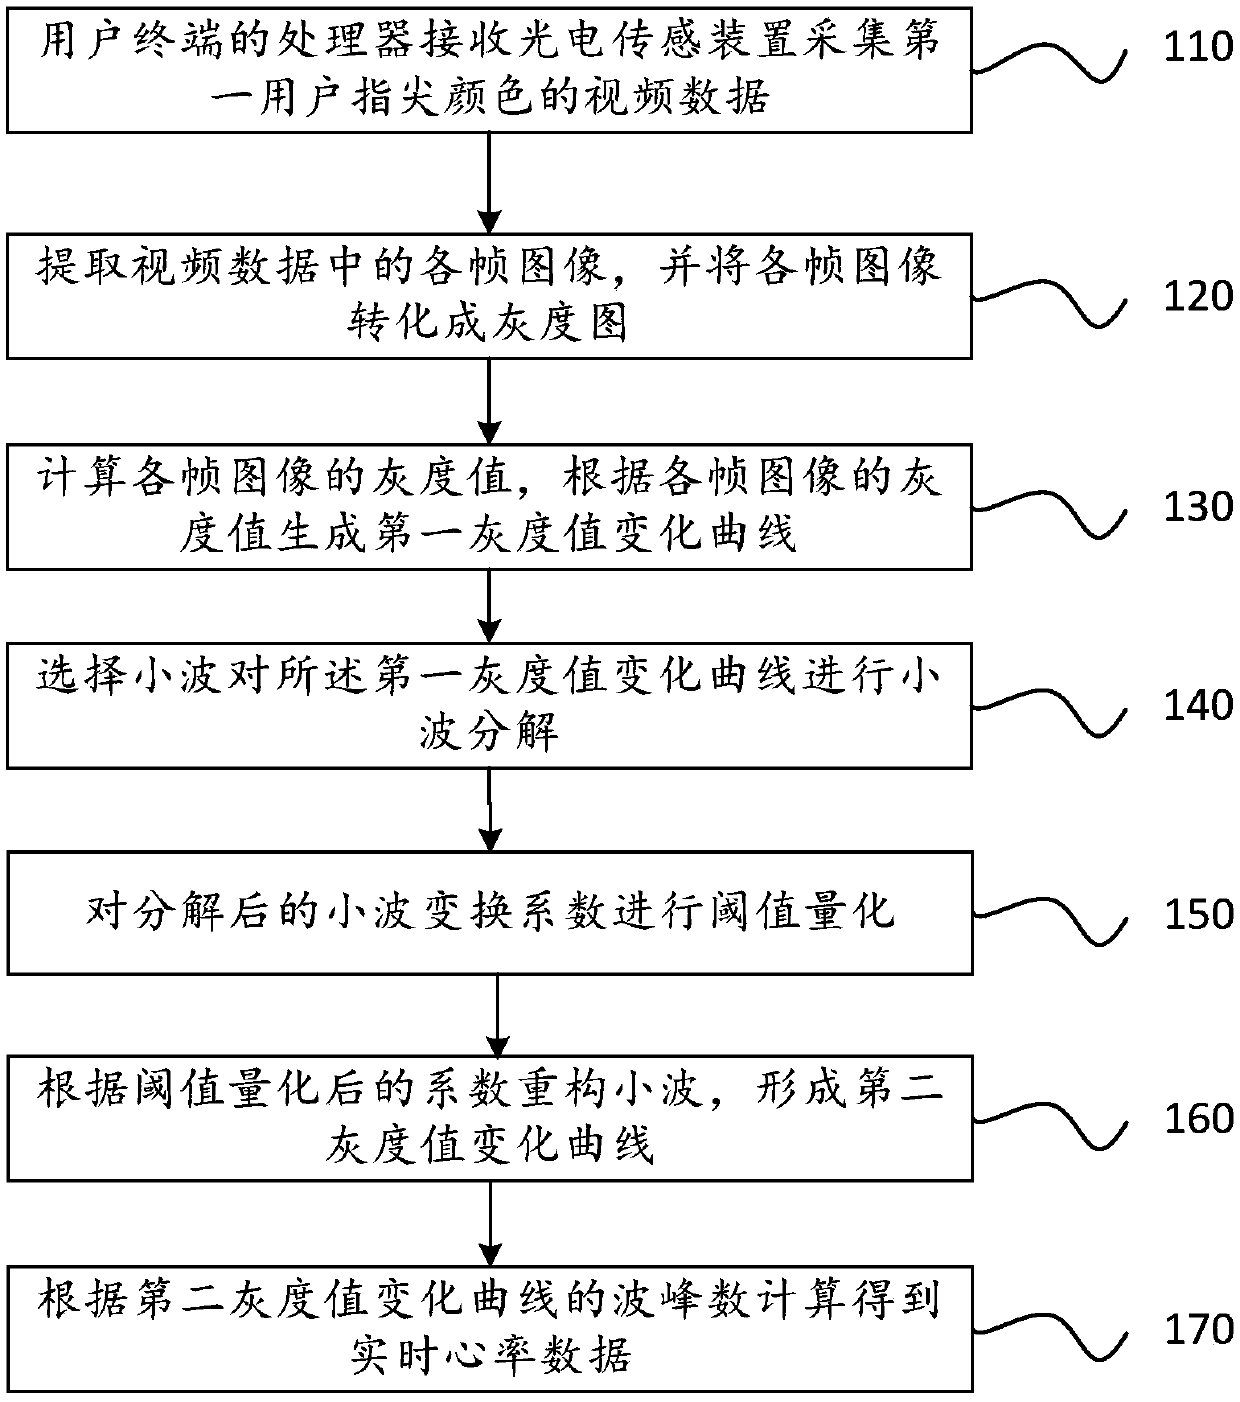 Heart rate monitoring method based on image processing